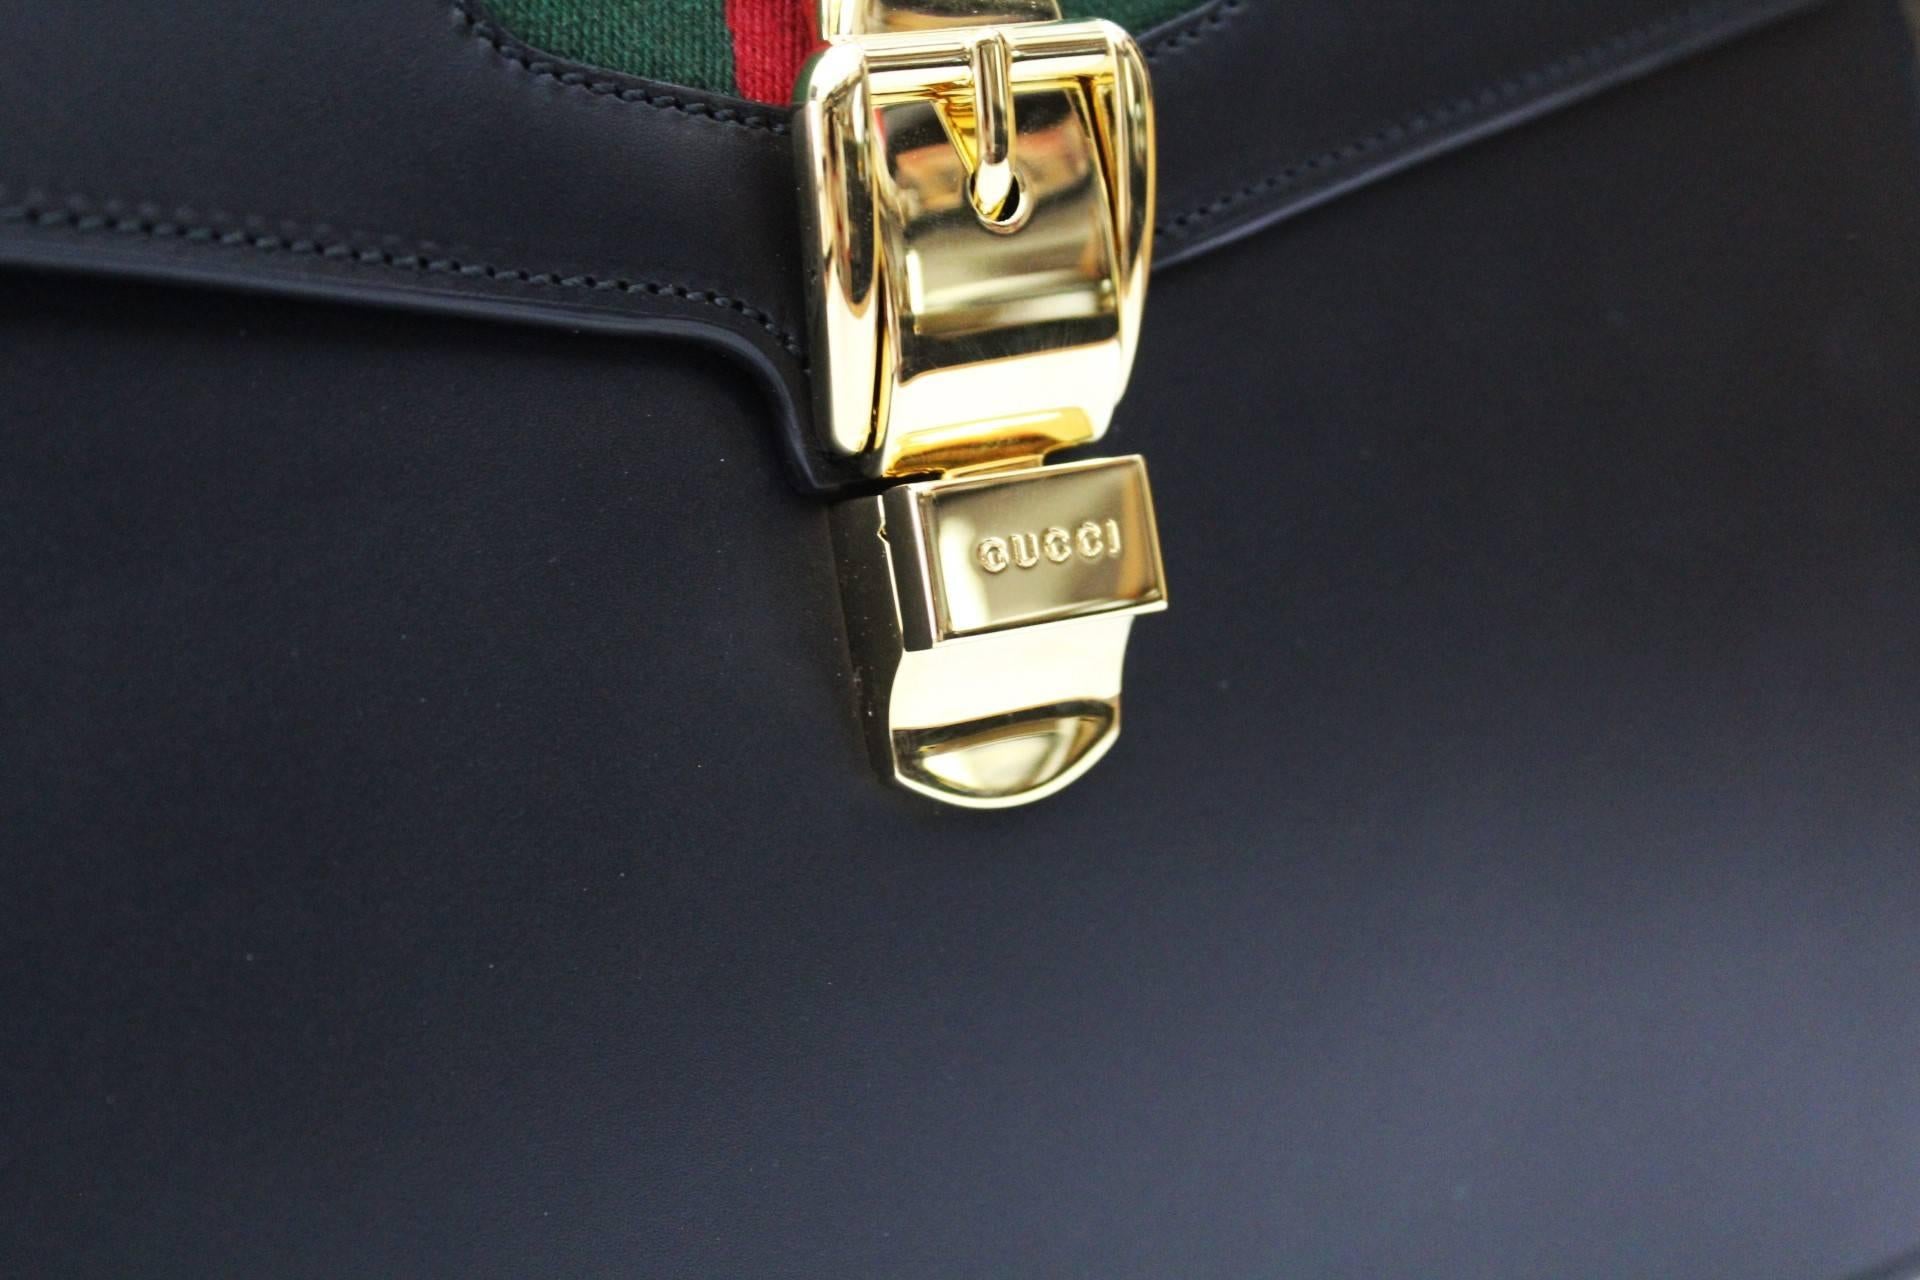 Sylvie bag from the last collection of Gucci . This is a beautiful top handle bag in smooth leather with nylon Web embedded and a gold chain .
Detachable shoulder strap with 42cm drop.
Microfiber lining with a suede-like finis